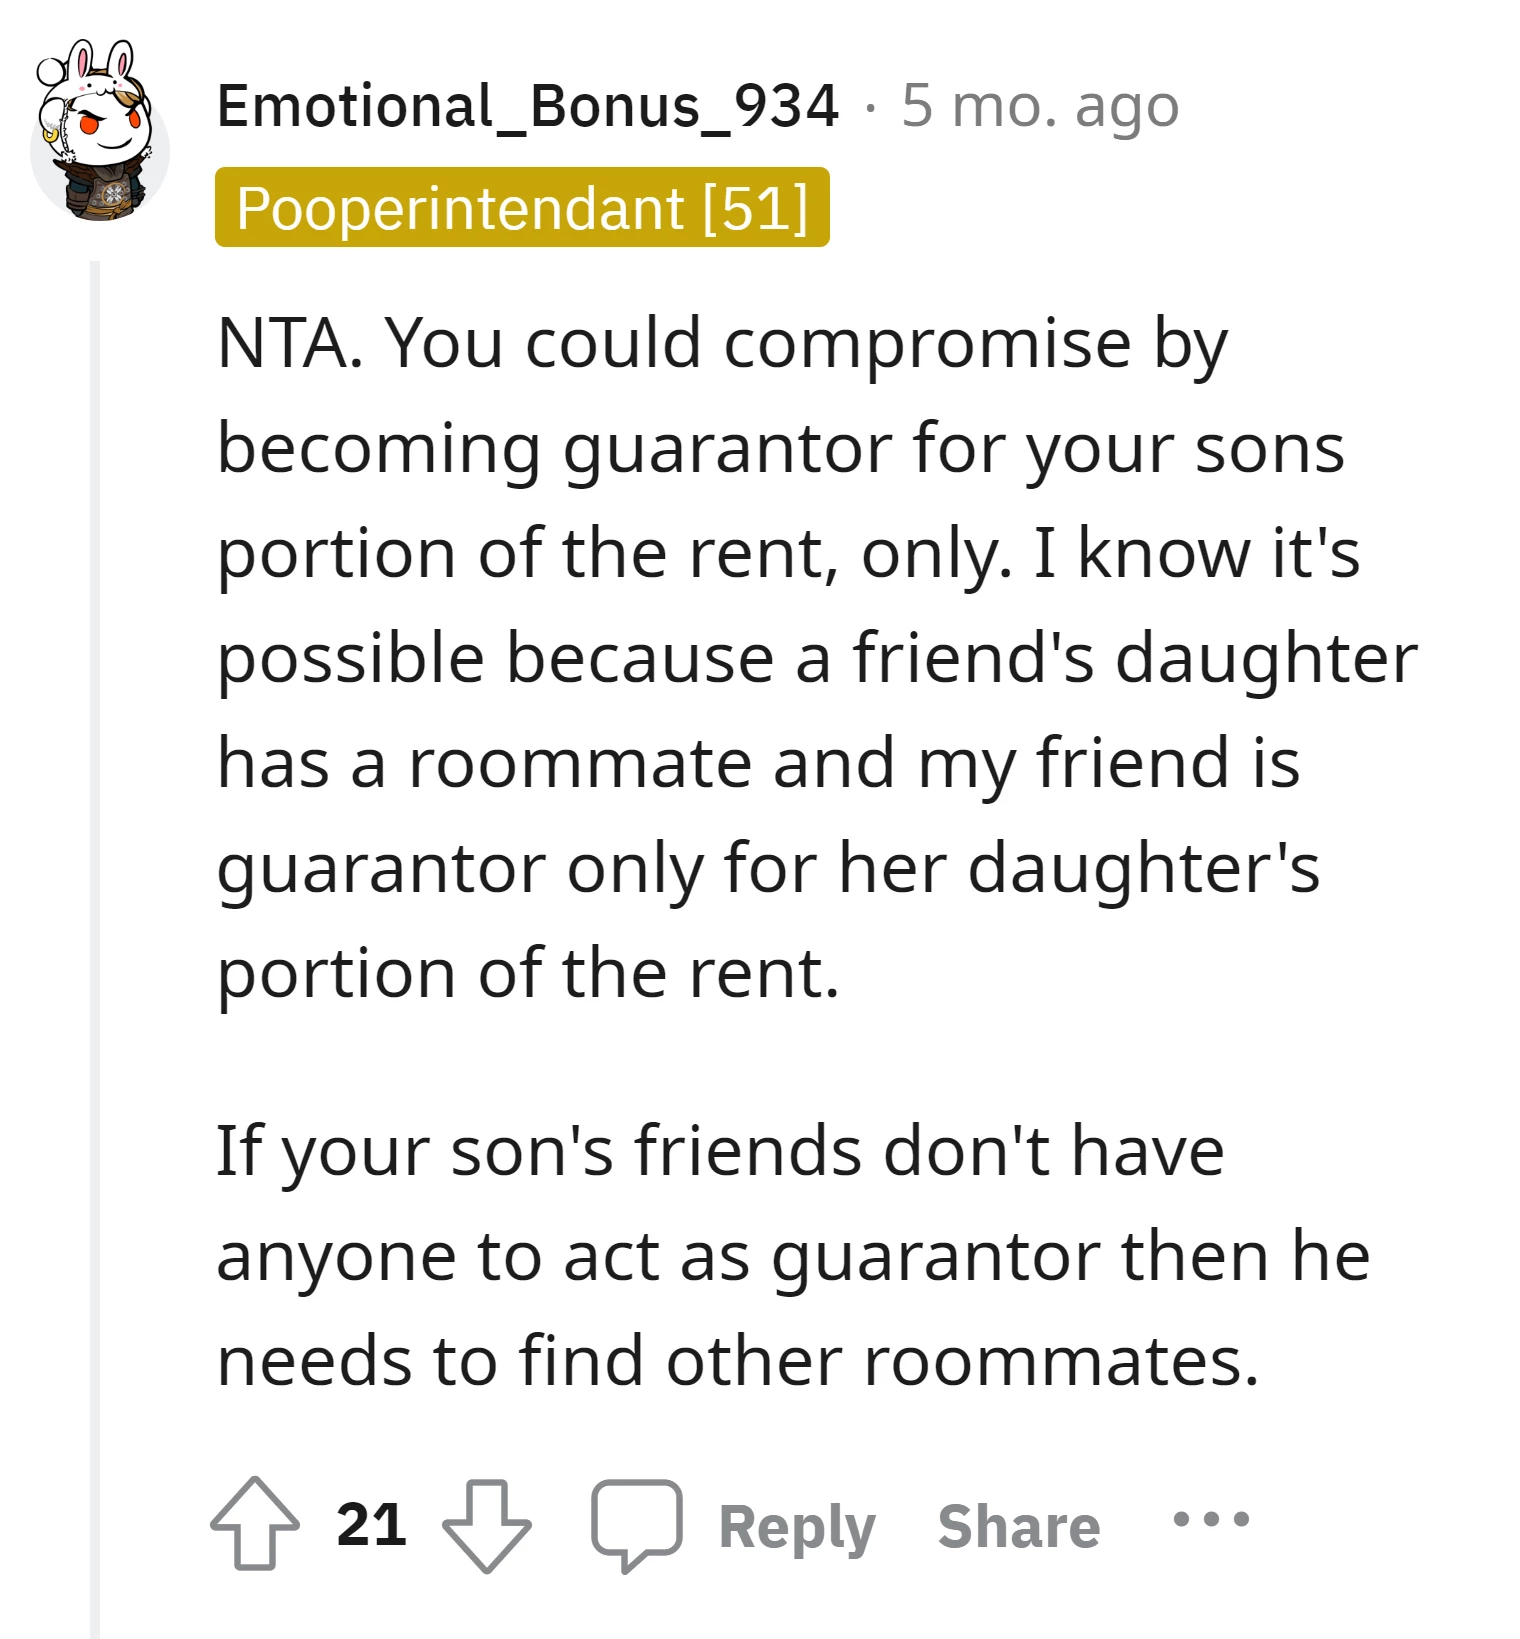 If the son's friends lack a guarantor, he should find different roommates